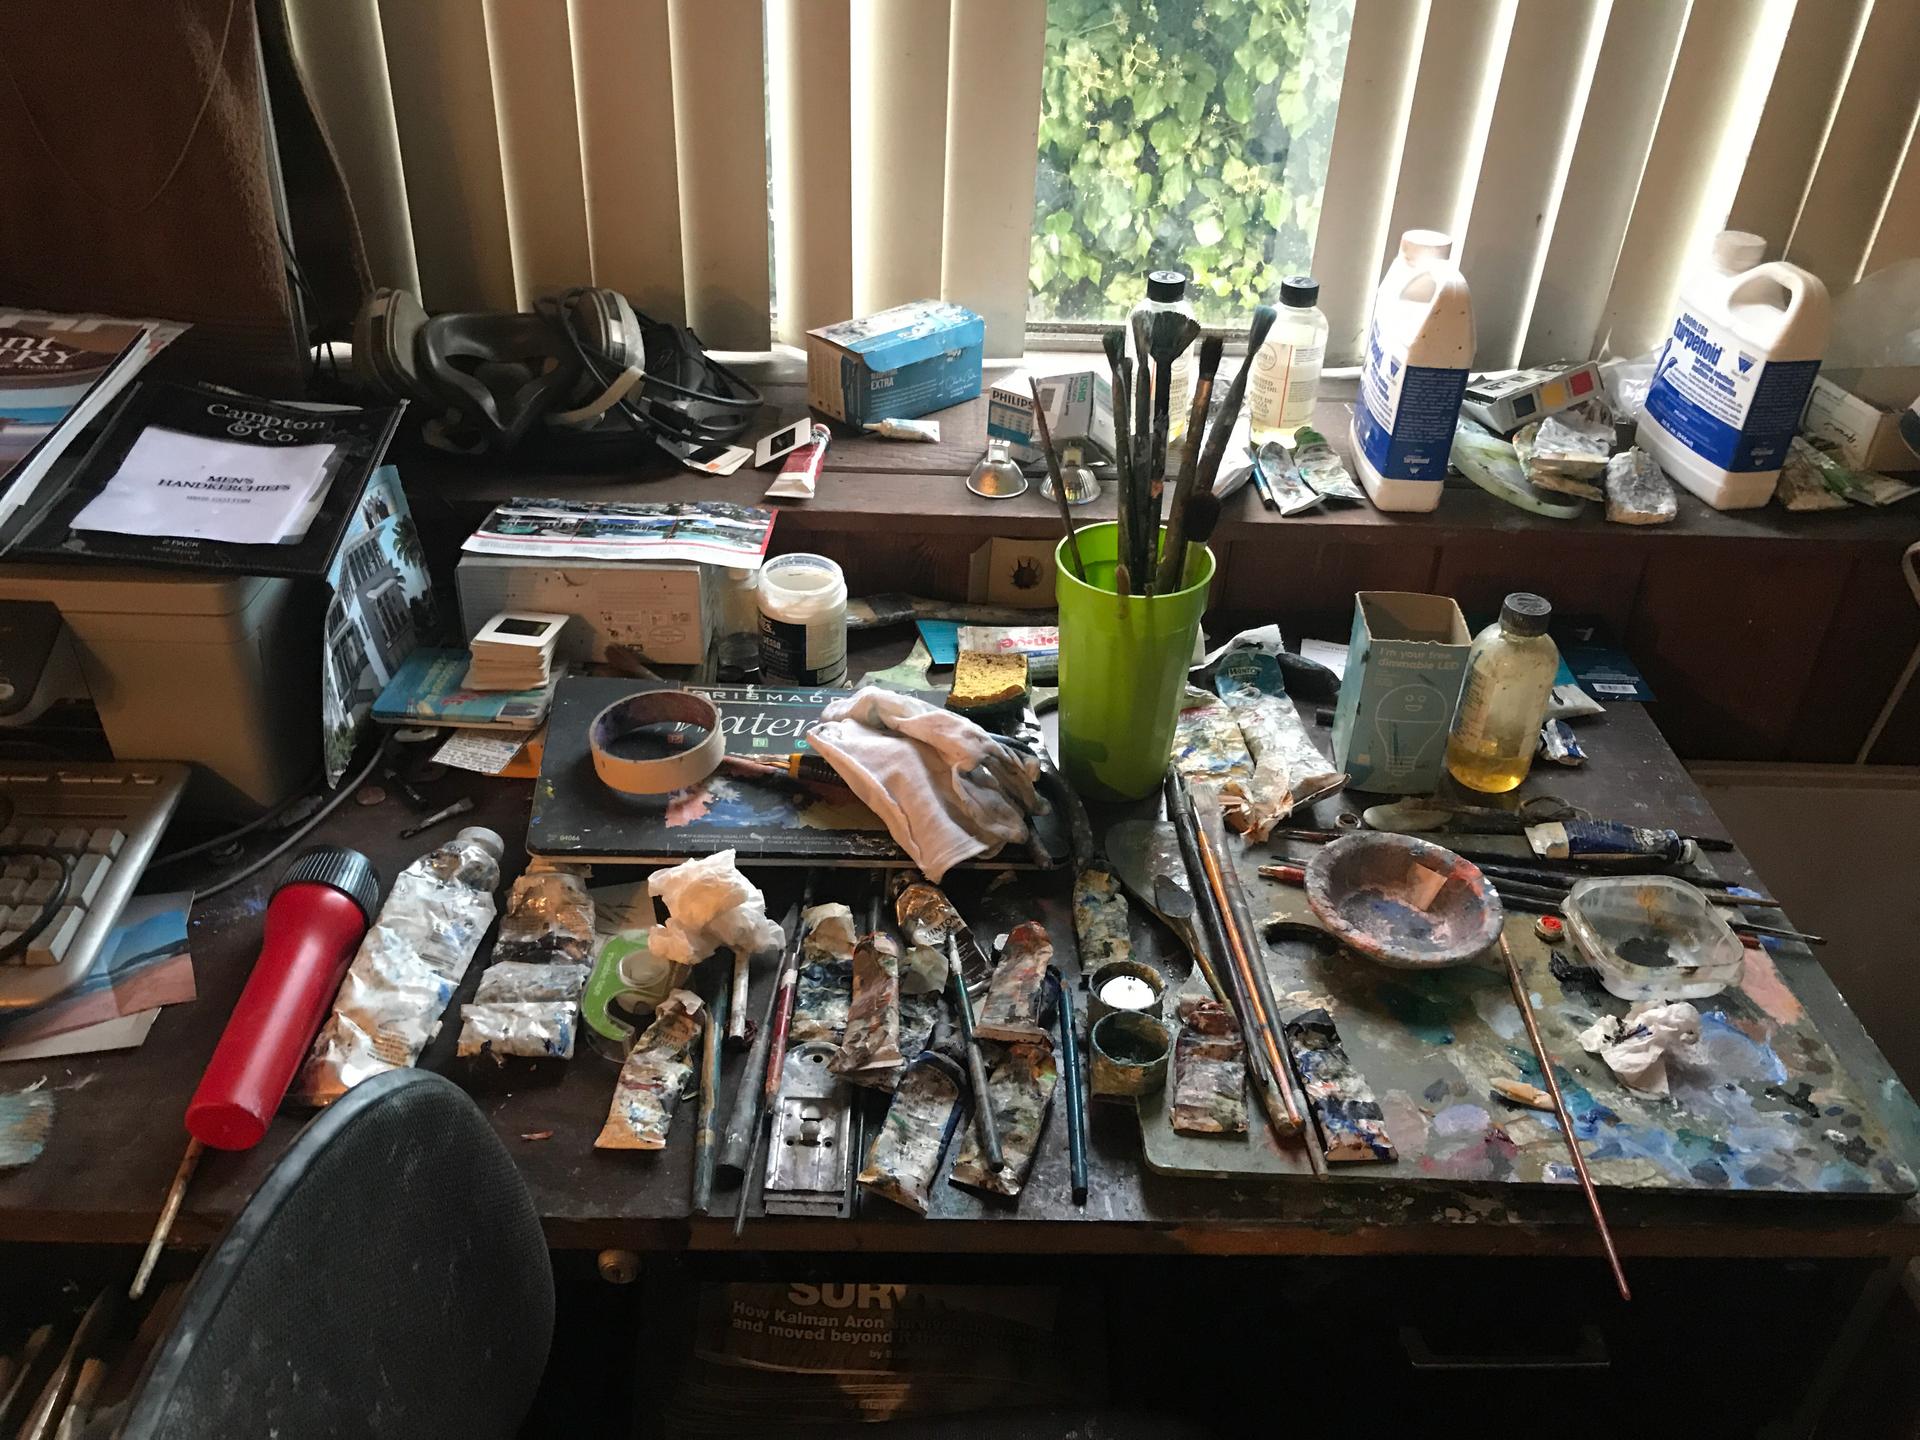 Kalman Aron typically paints at night in a small corner work space in his modest apartment in Beverly Hills.